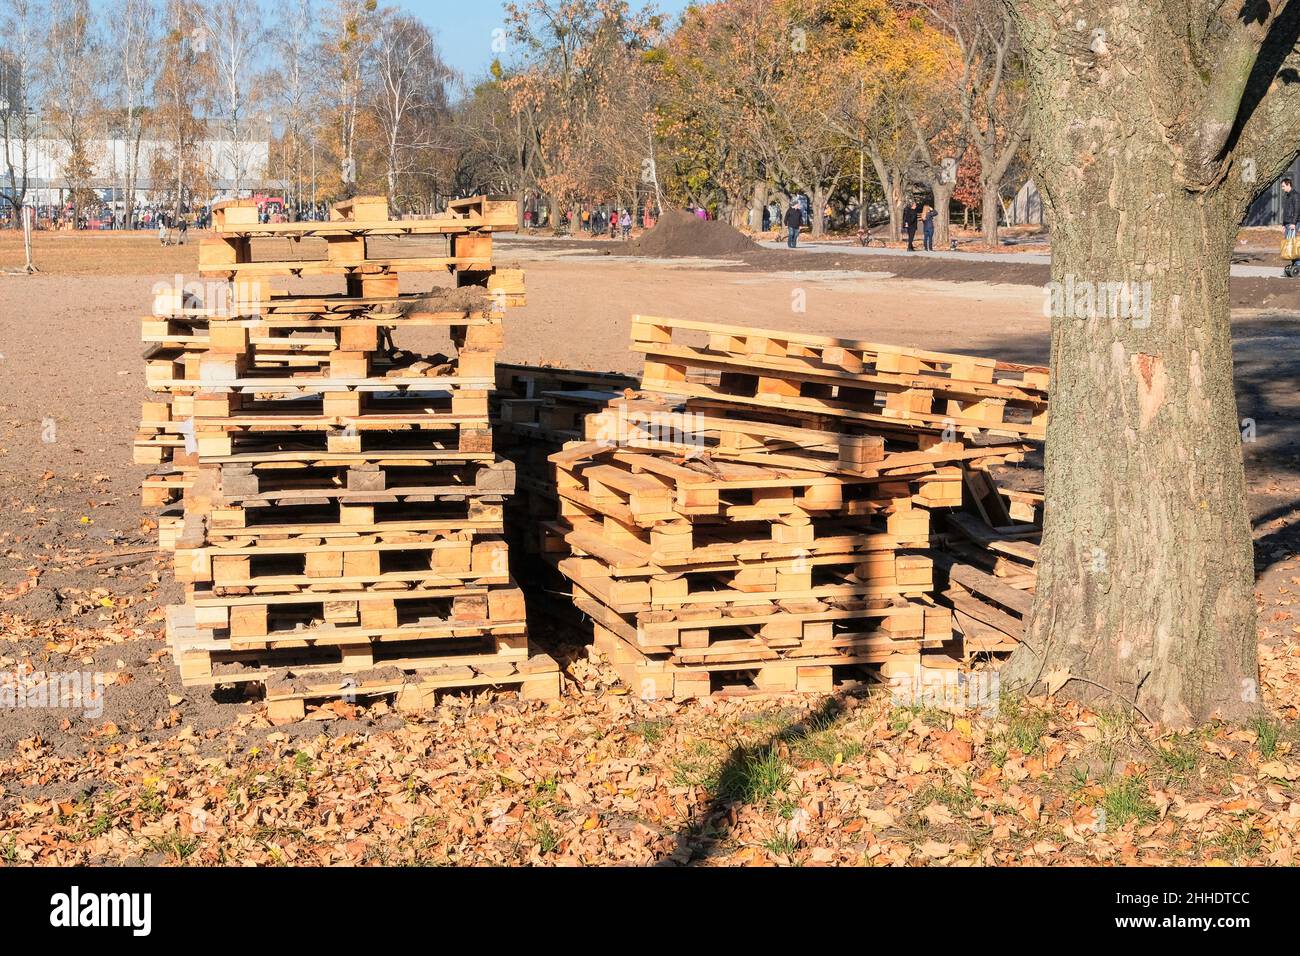 Stacks of lot rough wooden pallets at warehouse in fall park in sunny day. Pallets storage. Cargo and shipping concept. Stock Photo